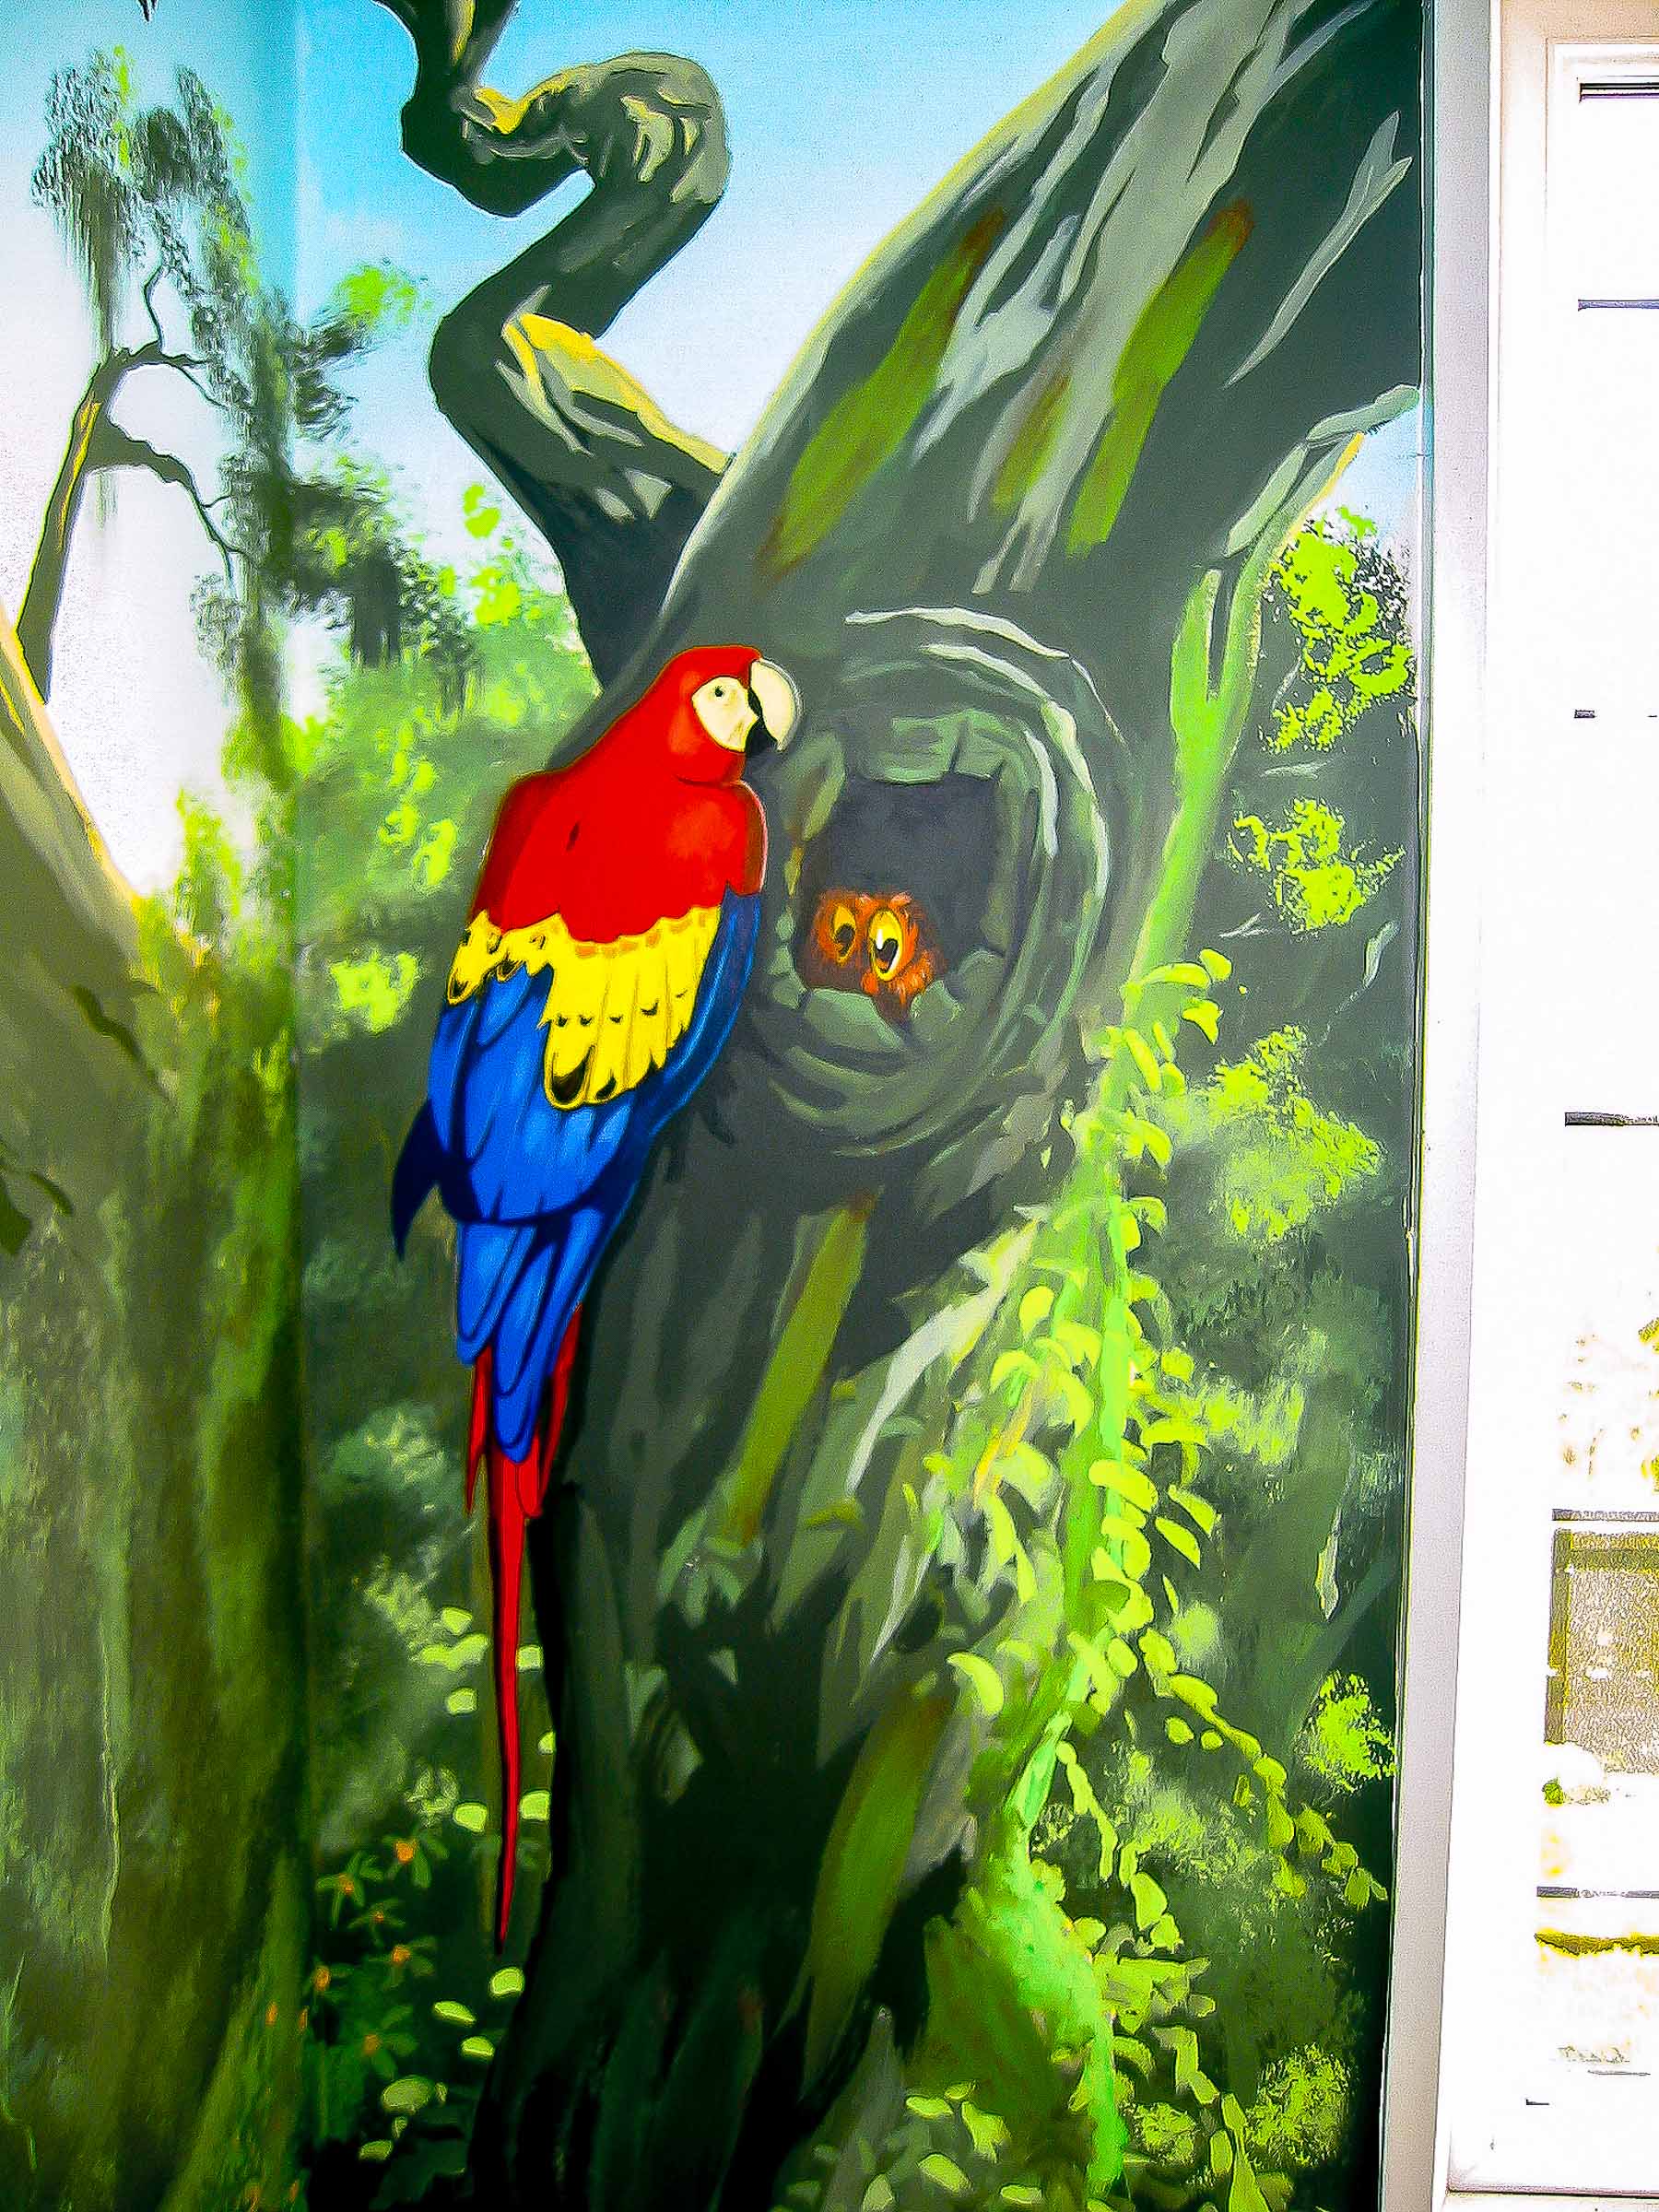 Painting of a parrot in a tree with its chicks, in part of the mural to the left of the window.